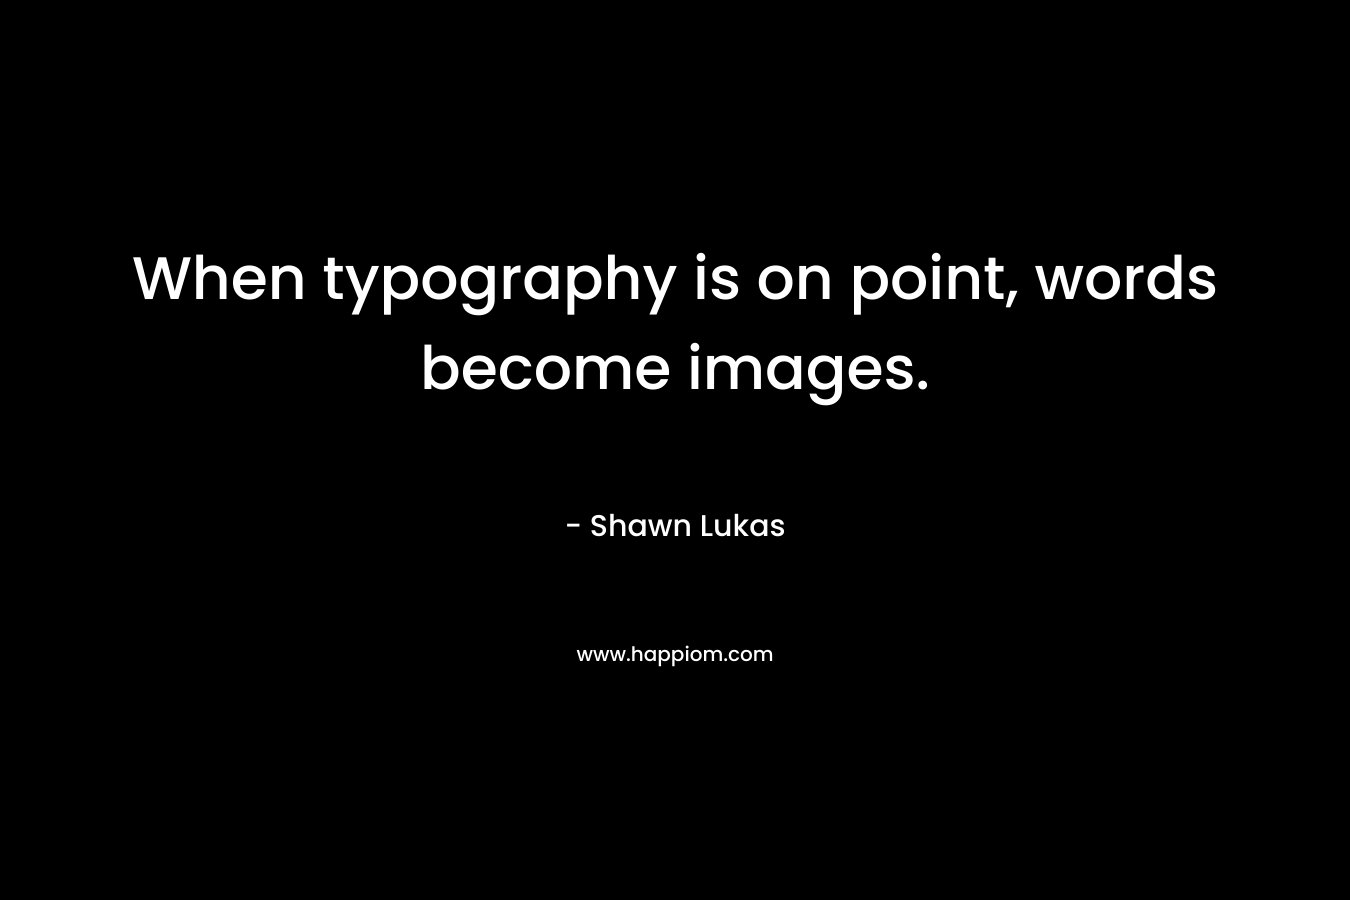 When typography is on point, words become images. – Shawn Lukas